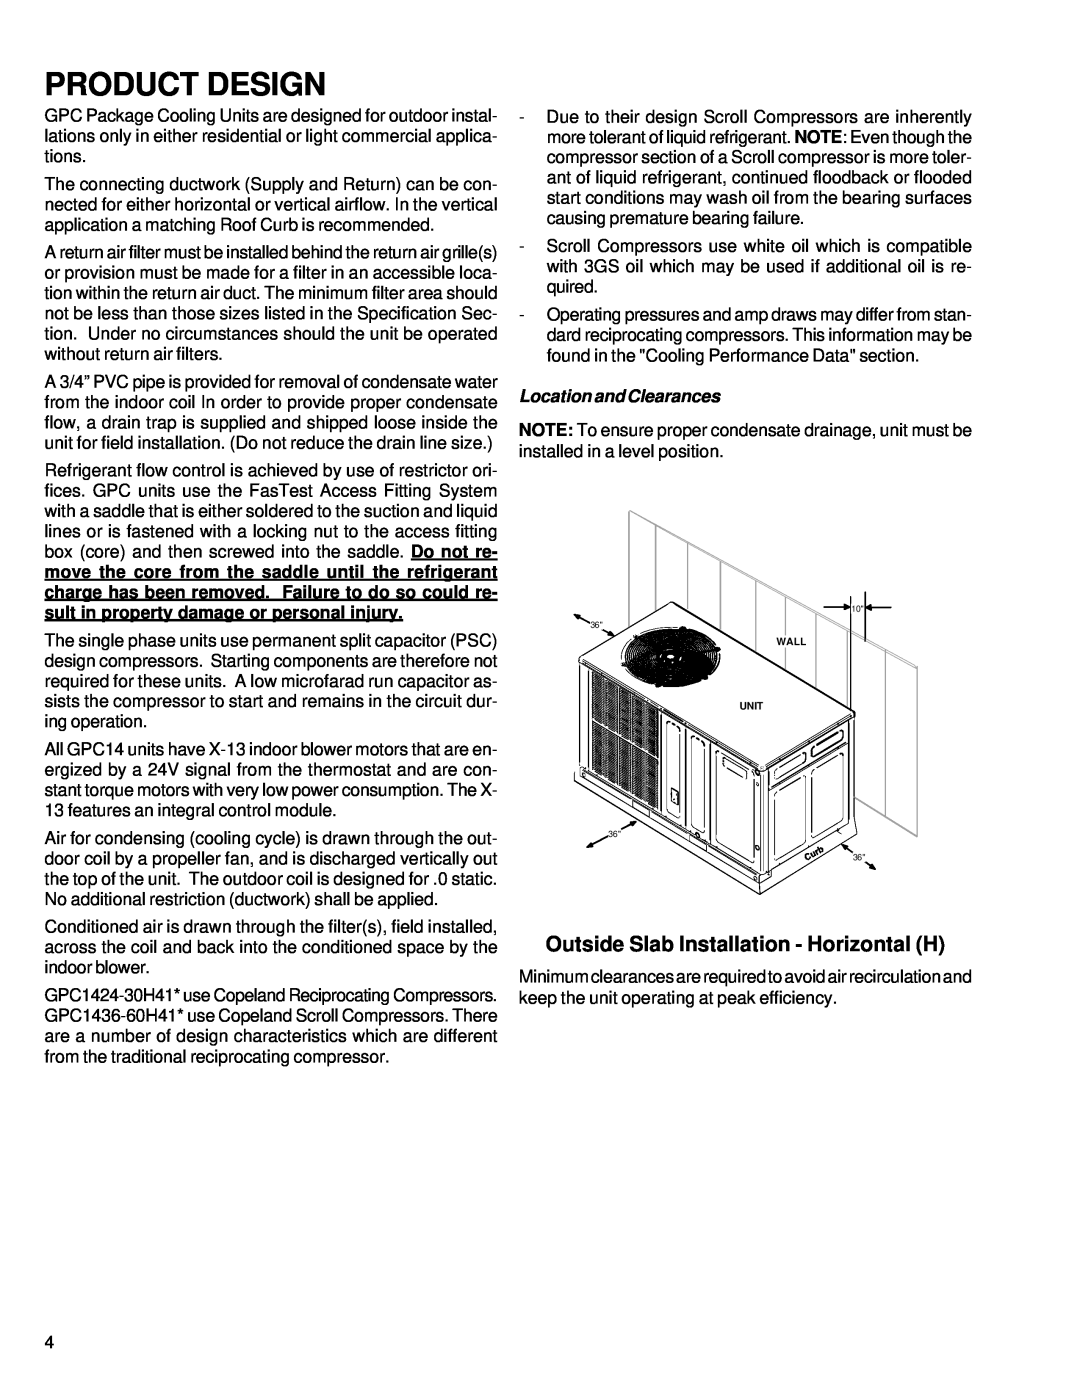 Goodman Mfg R-410A service manual Product Design, Outside Slab Installation - Horizontal H, Location and Clearances 